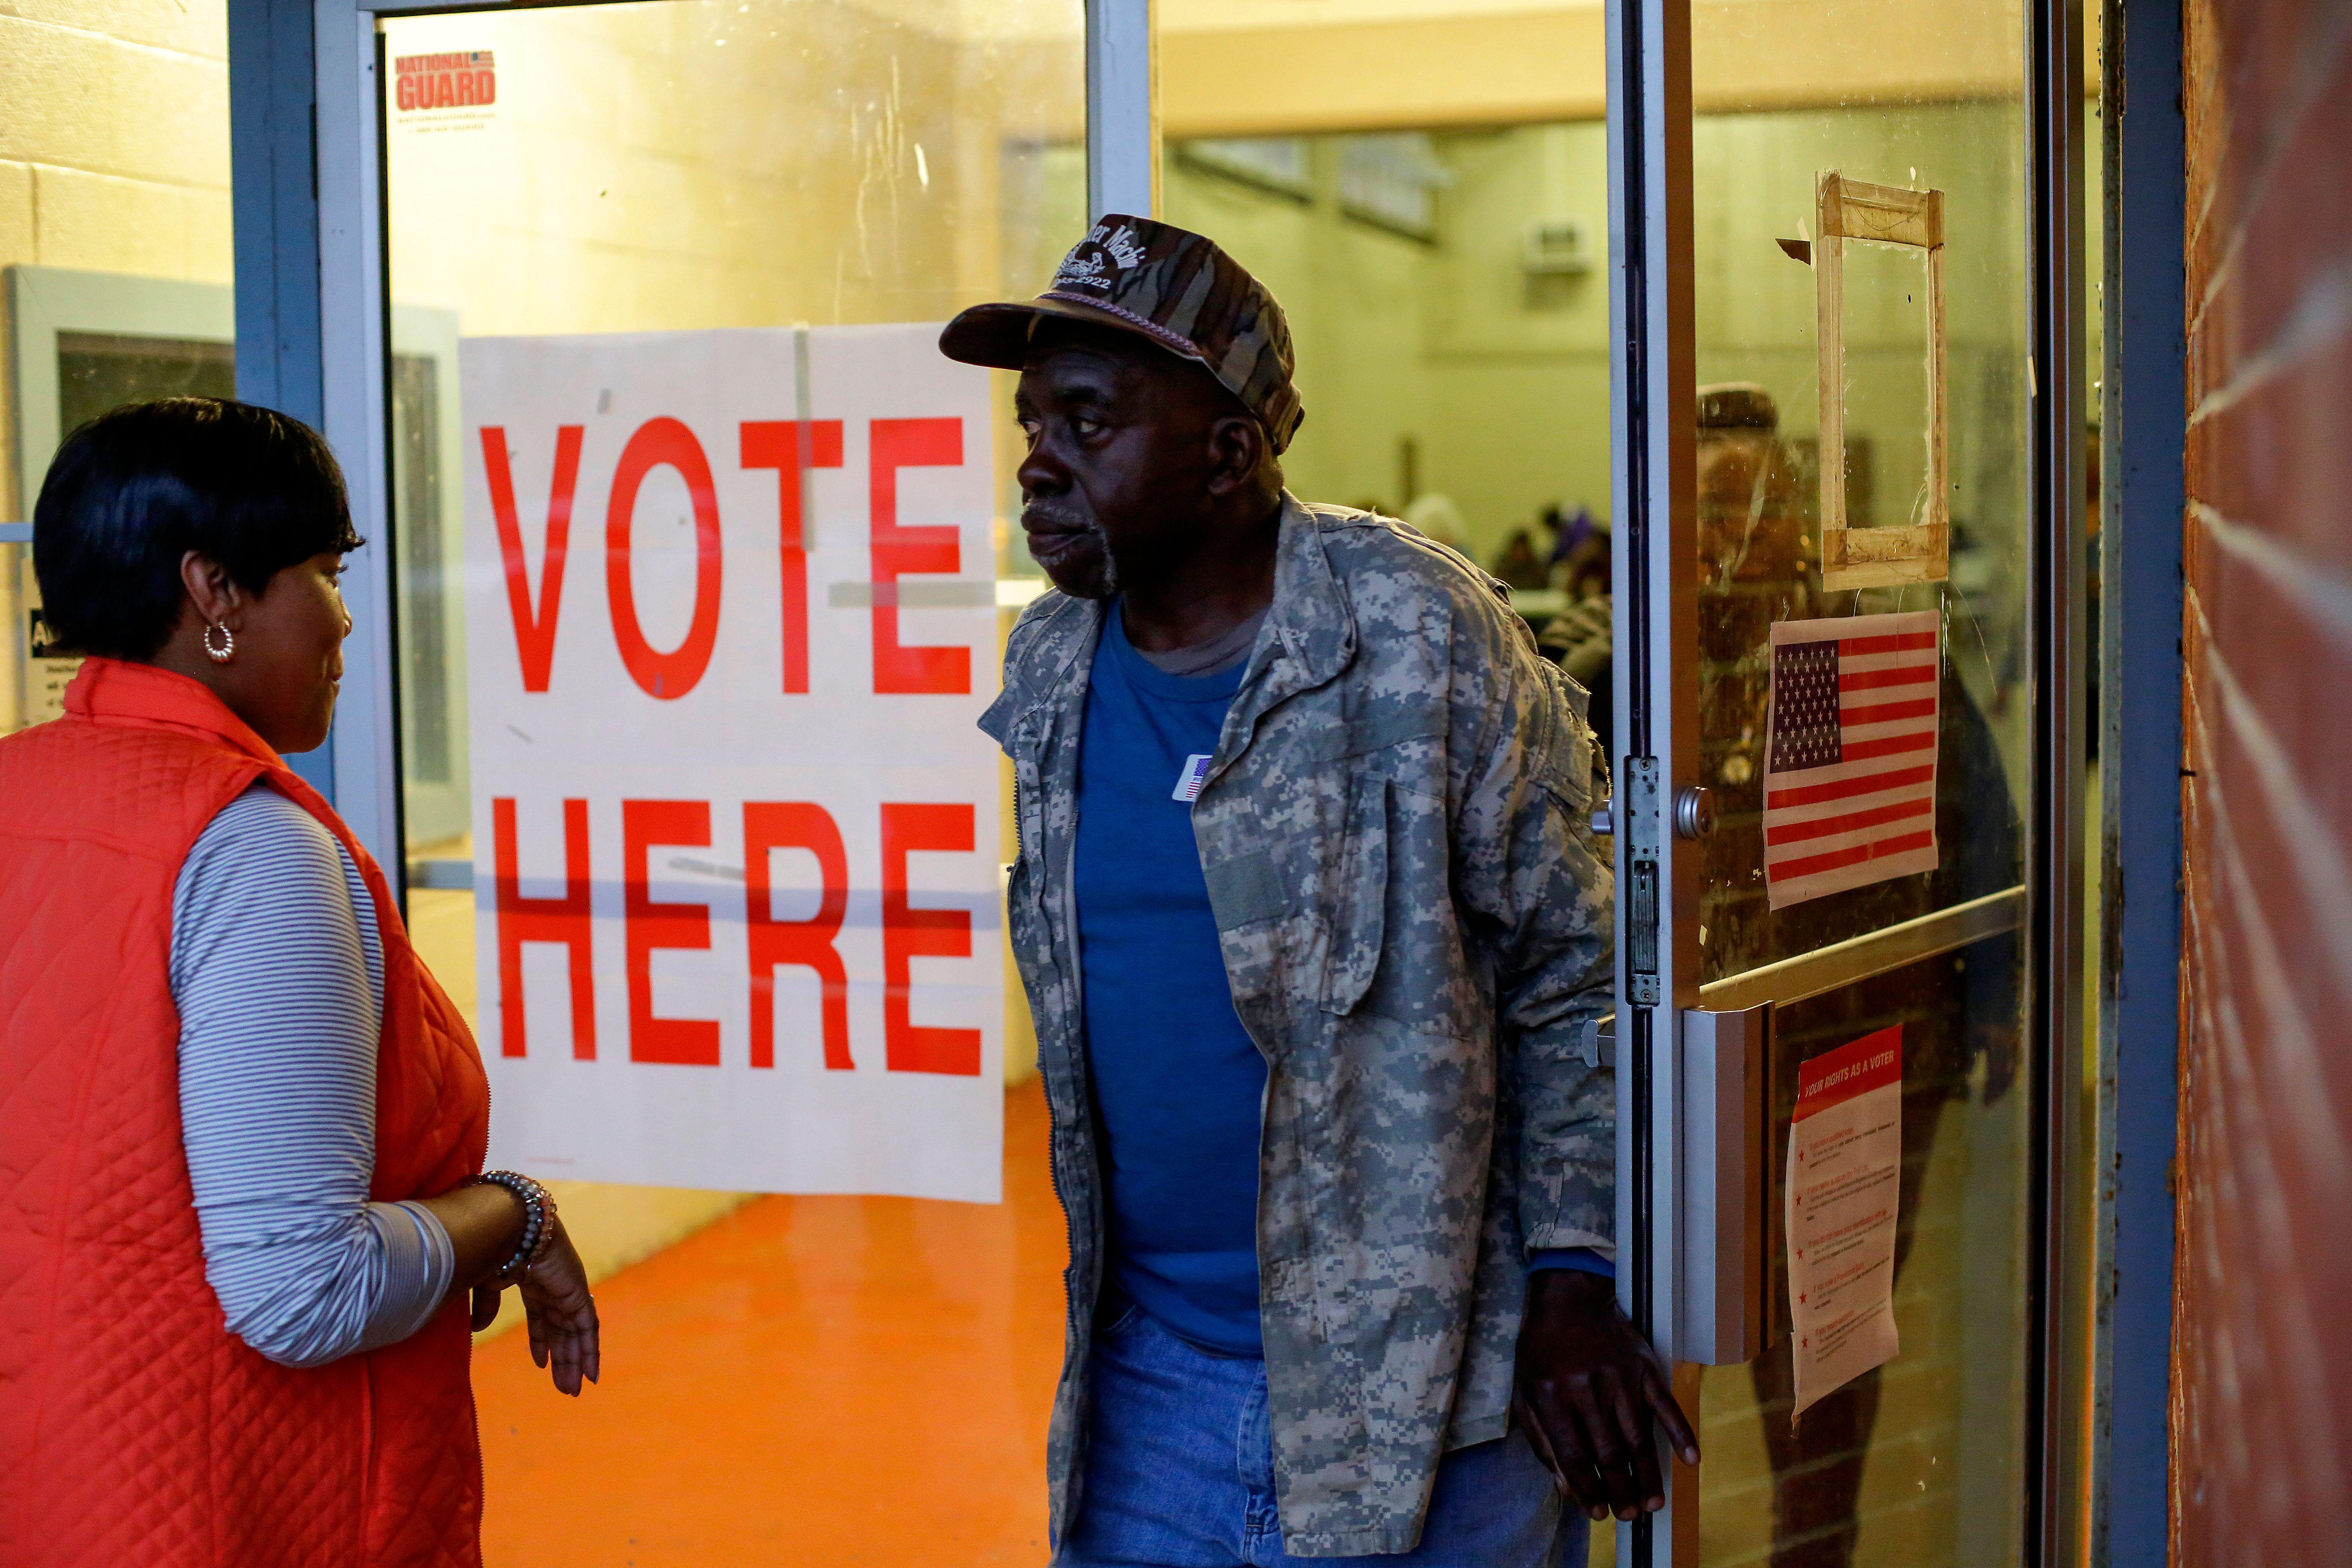 A Black man walks out of a building where it says VOTE HERE on the door.